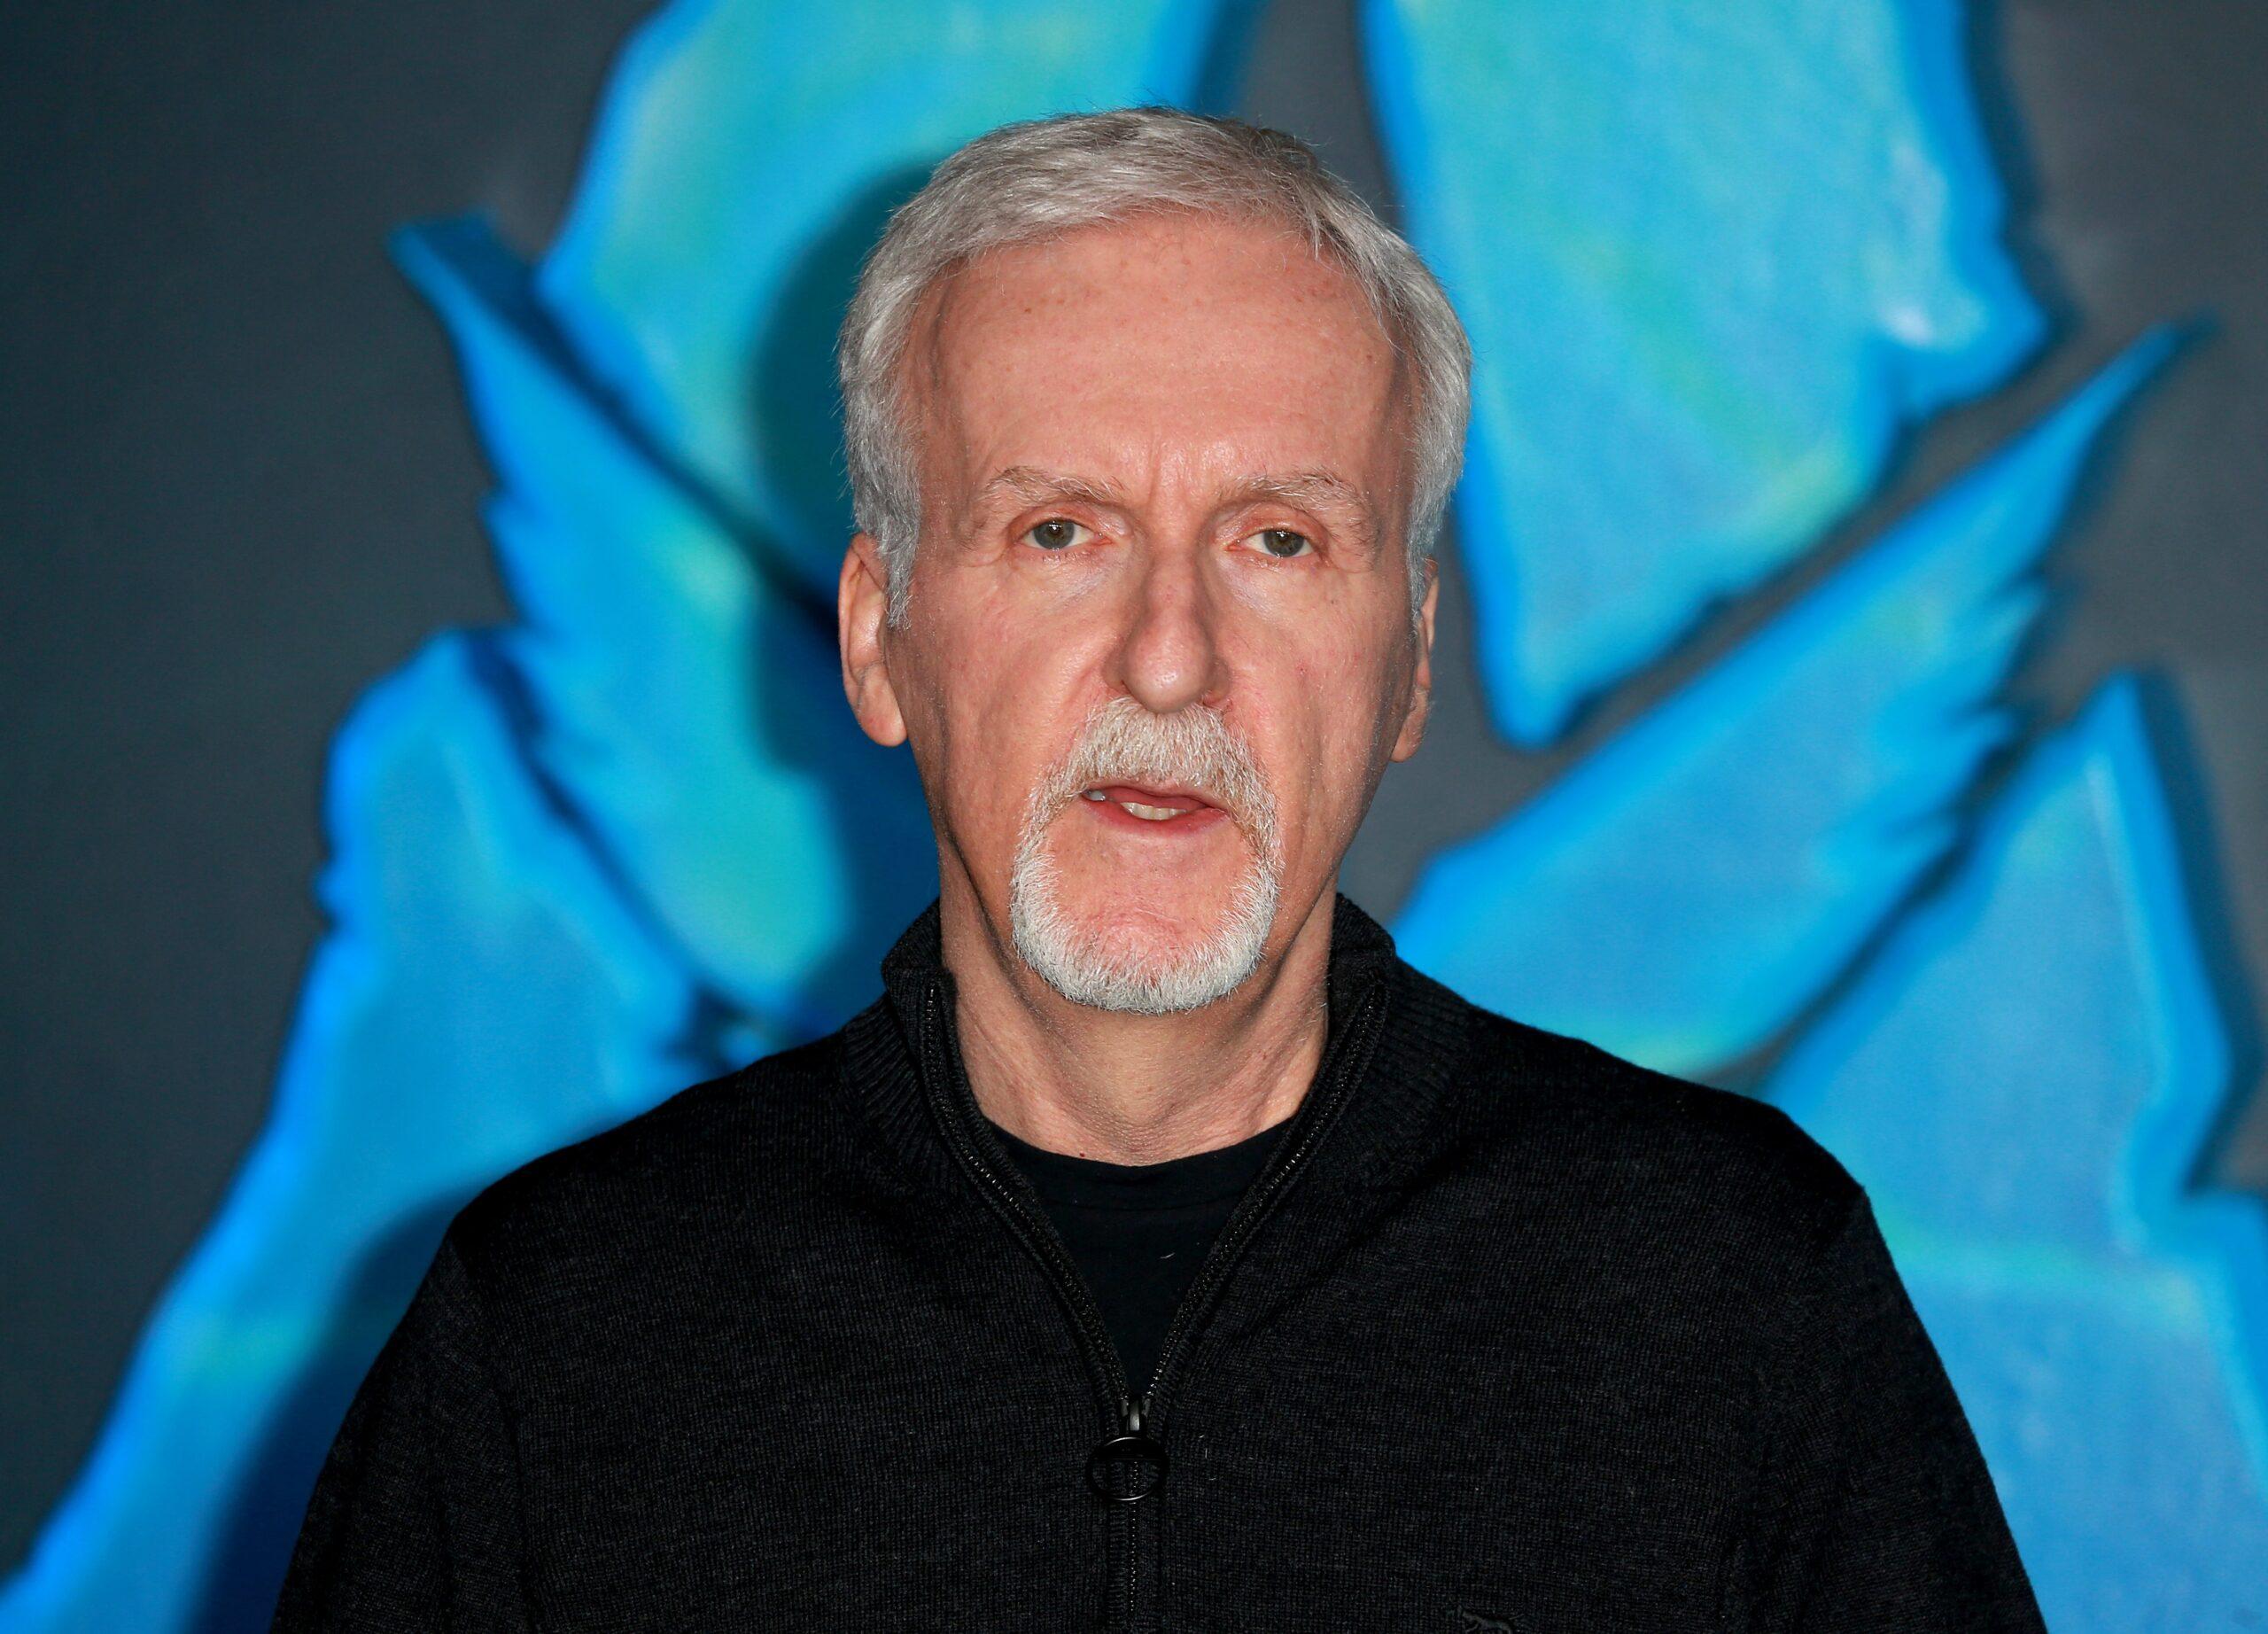 'Titanic' Director James Cameron Speaks On The Titan Submersible Tragedy: 'Impossible For Me To Process'